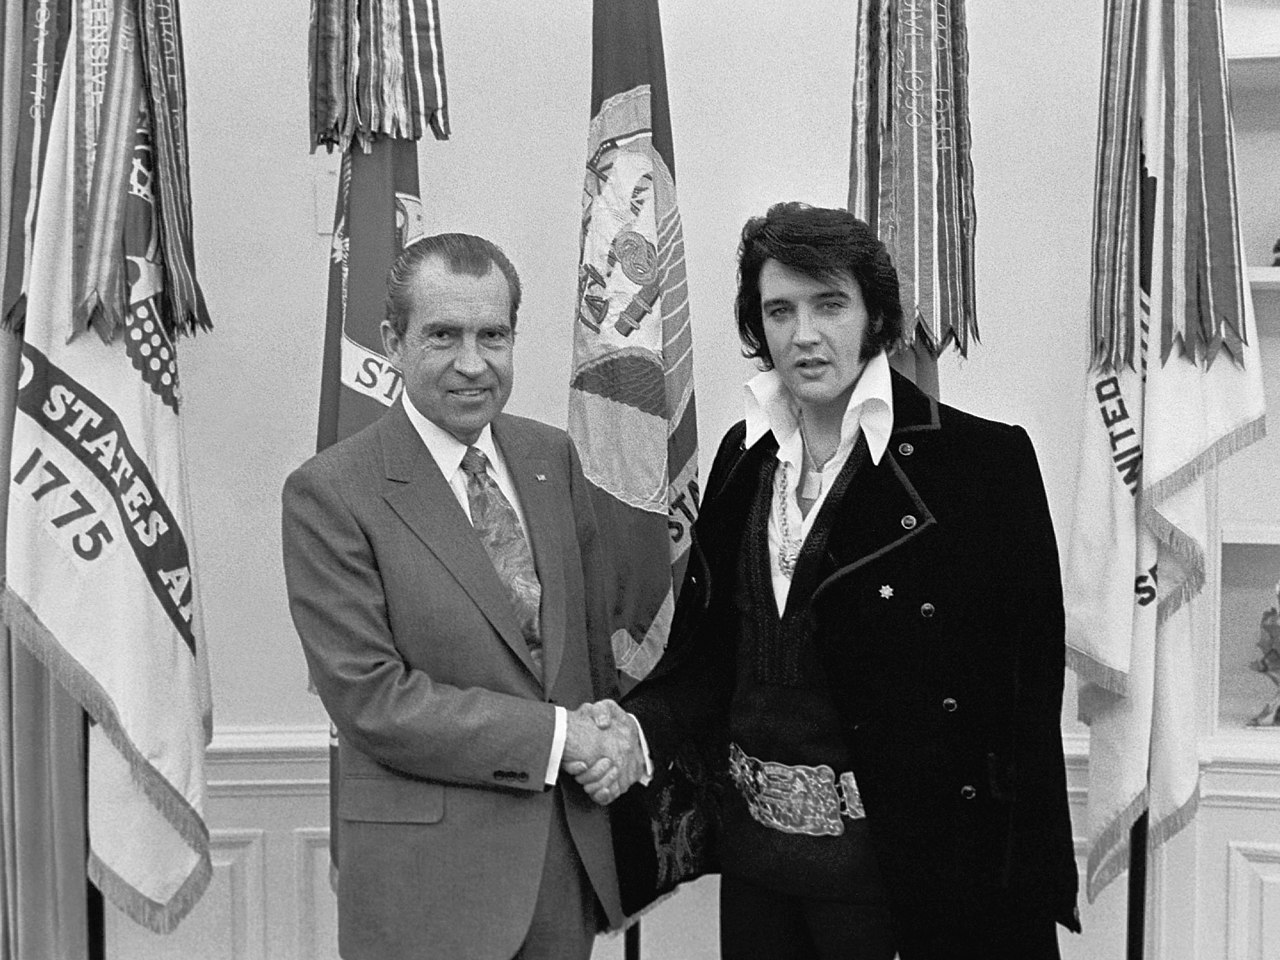 Elvis Presley visited the White House Oval Office